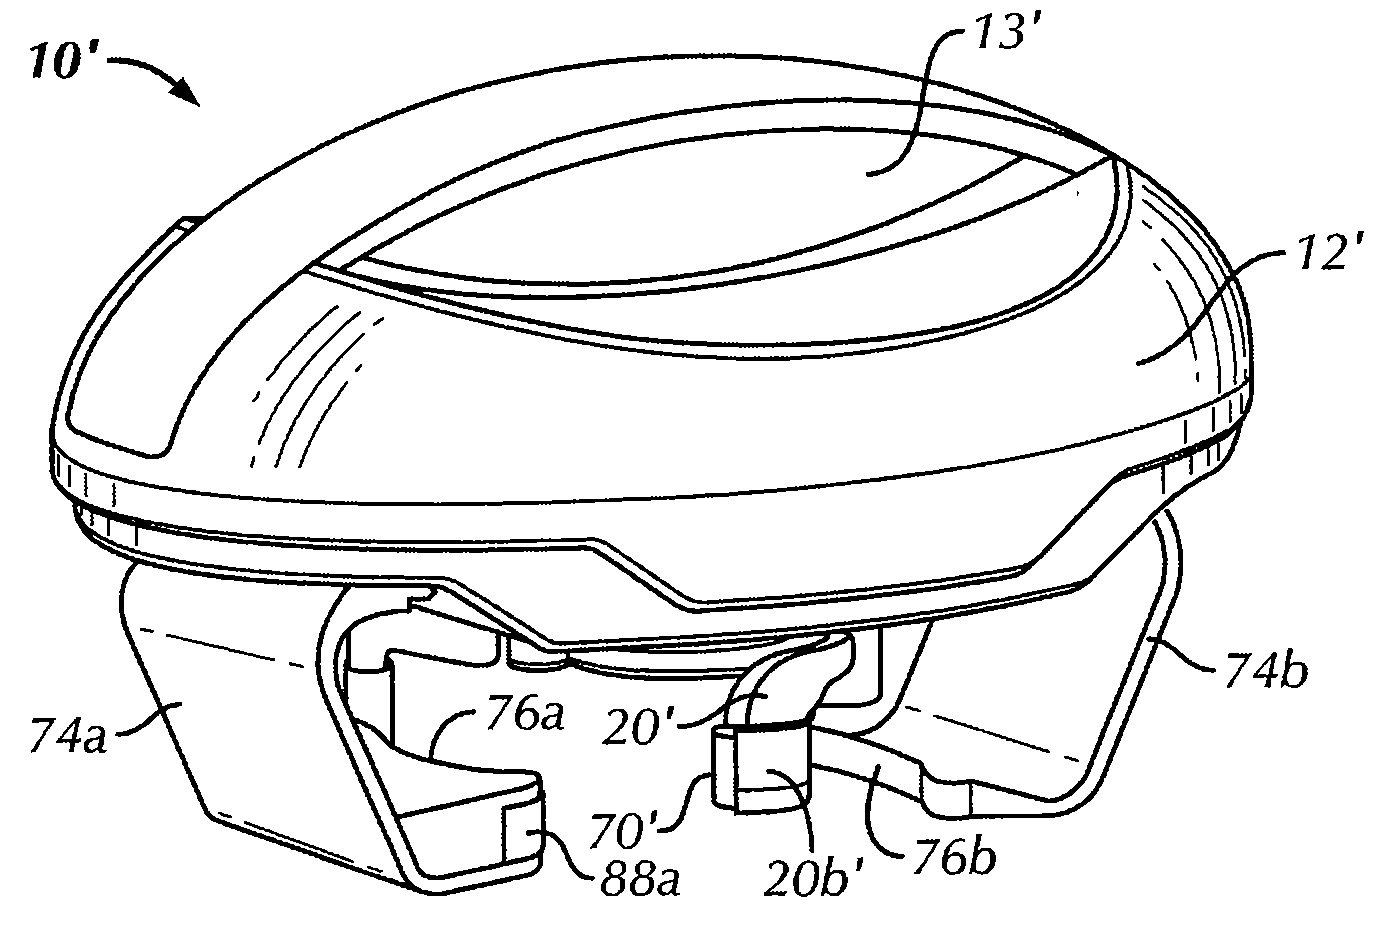 Hand-held device for removing an enclosure from a container